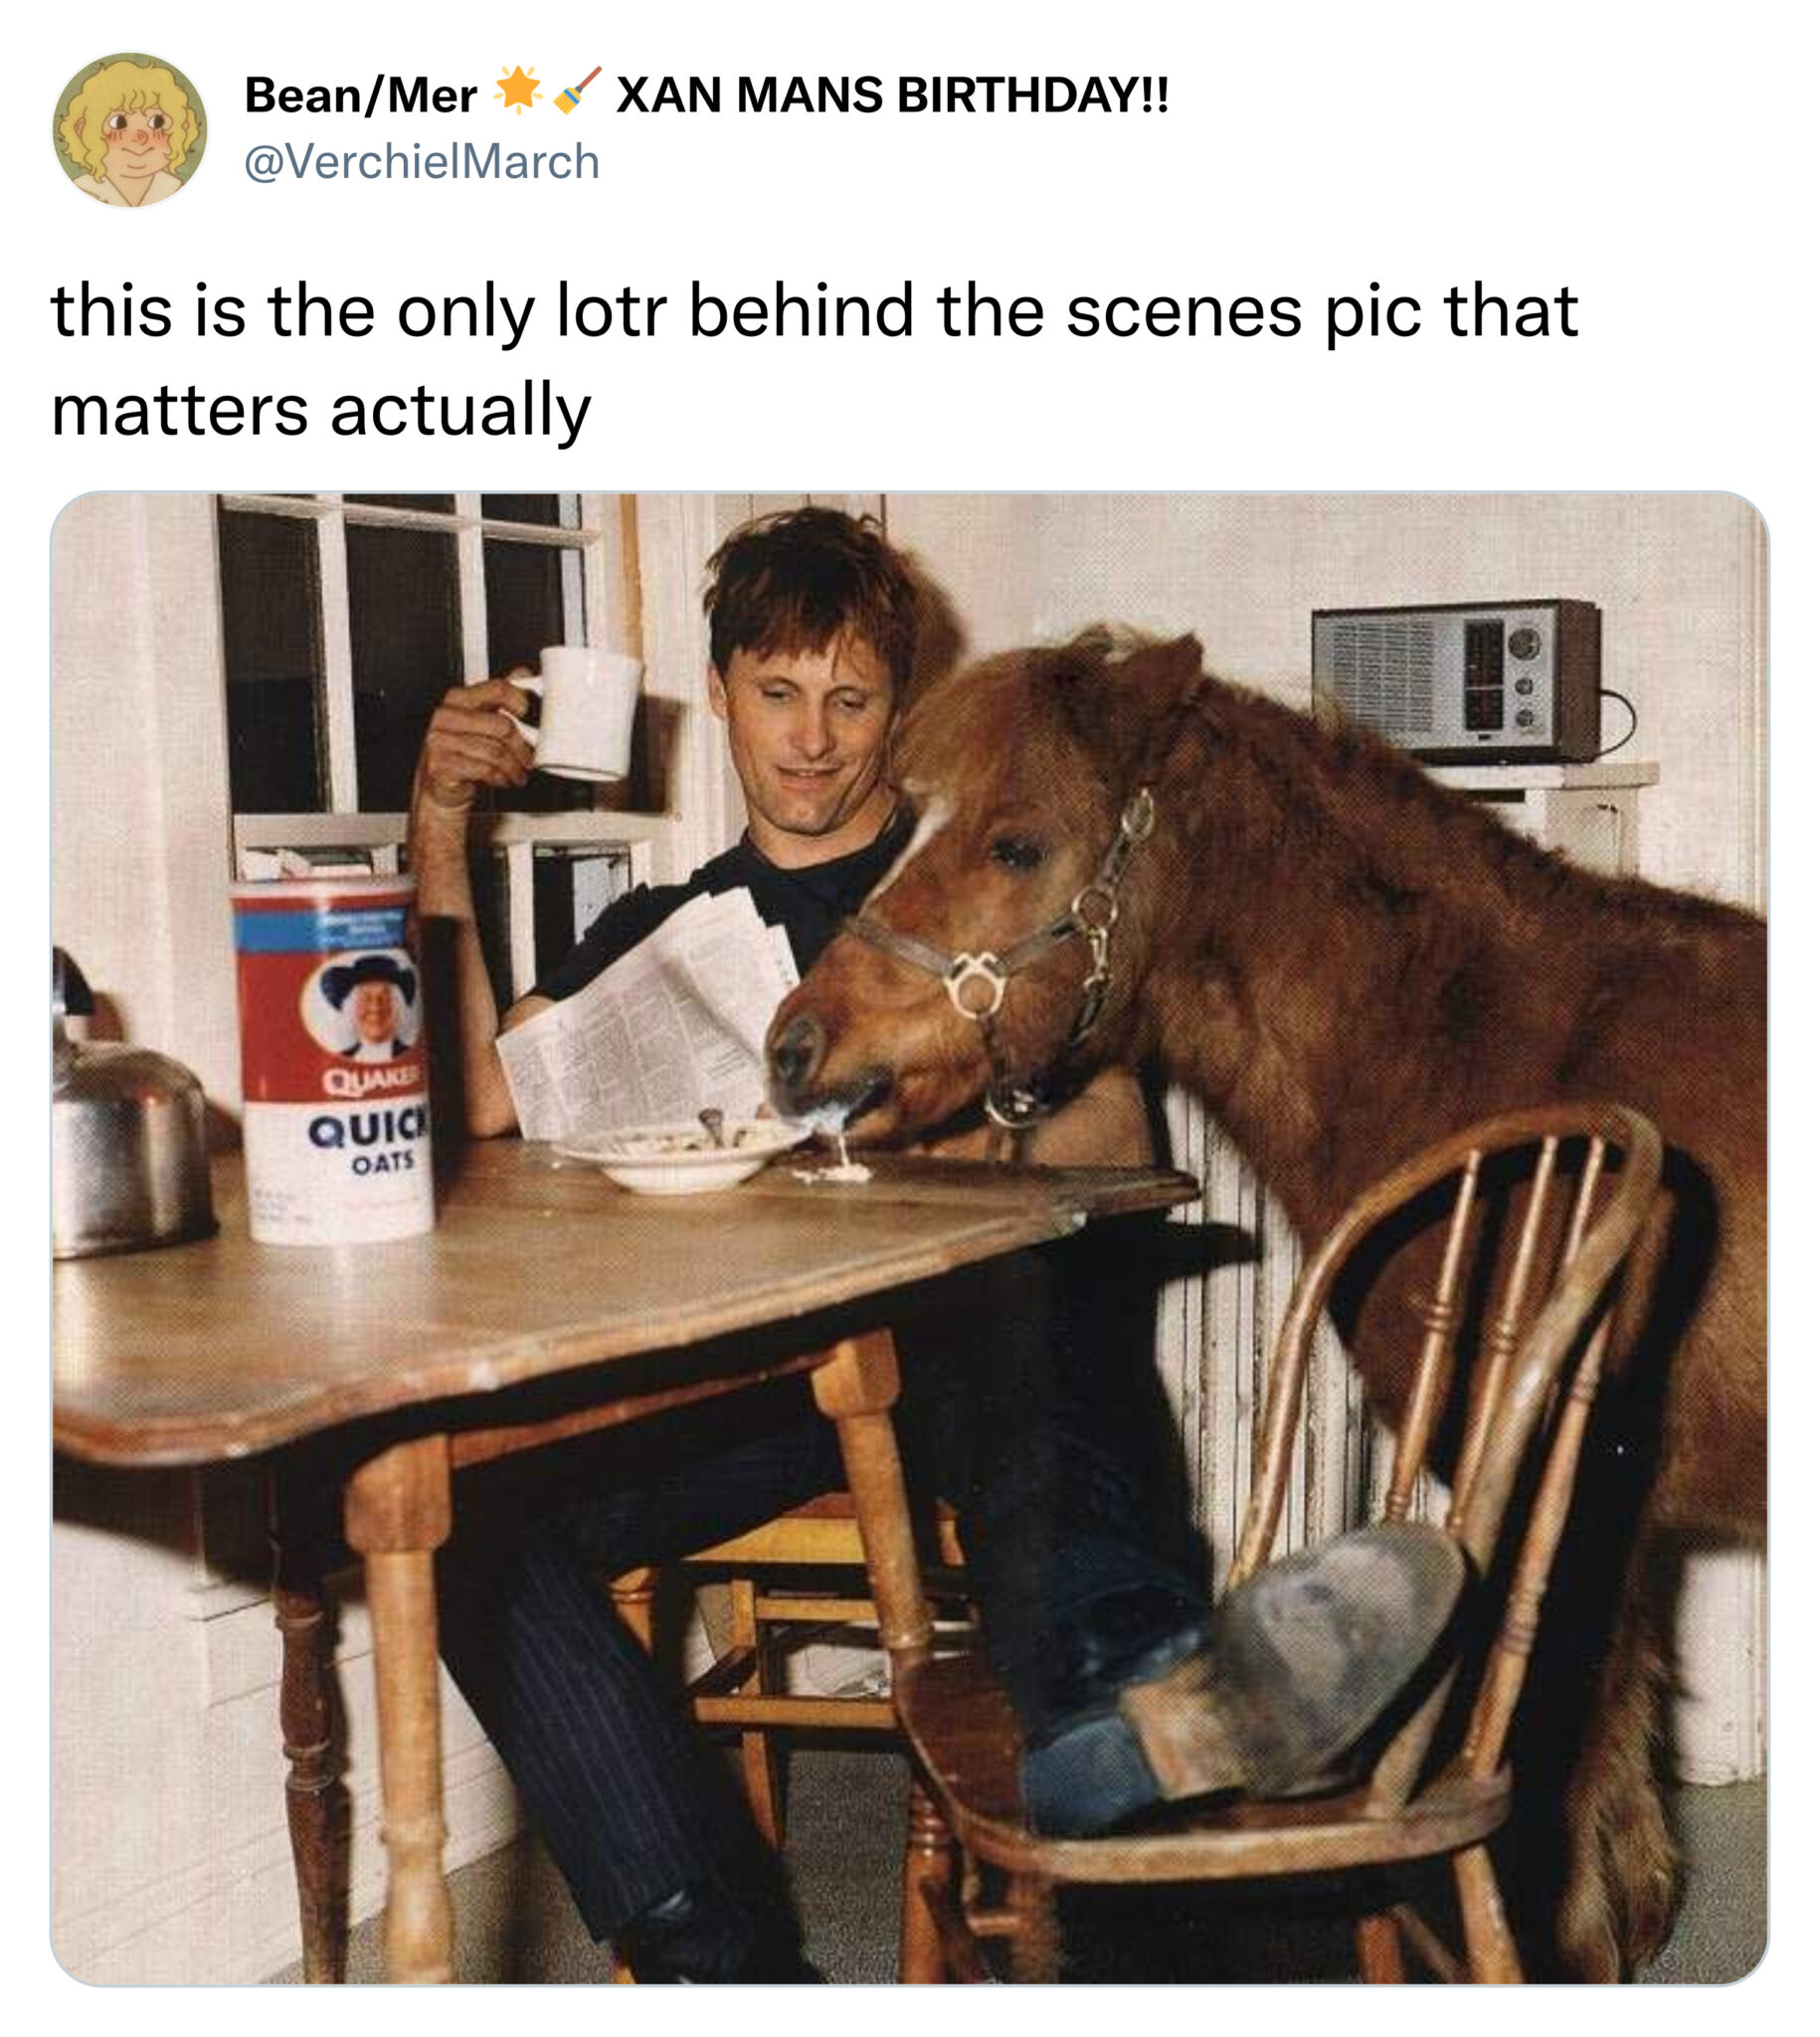 funny tweets and posts on twitter -  horse - BeanMer Xan Mans Birthday!! this is the only lotr behind the scenes pic that matters actually Que Quic Dats